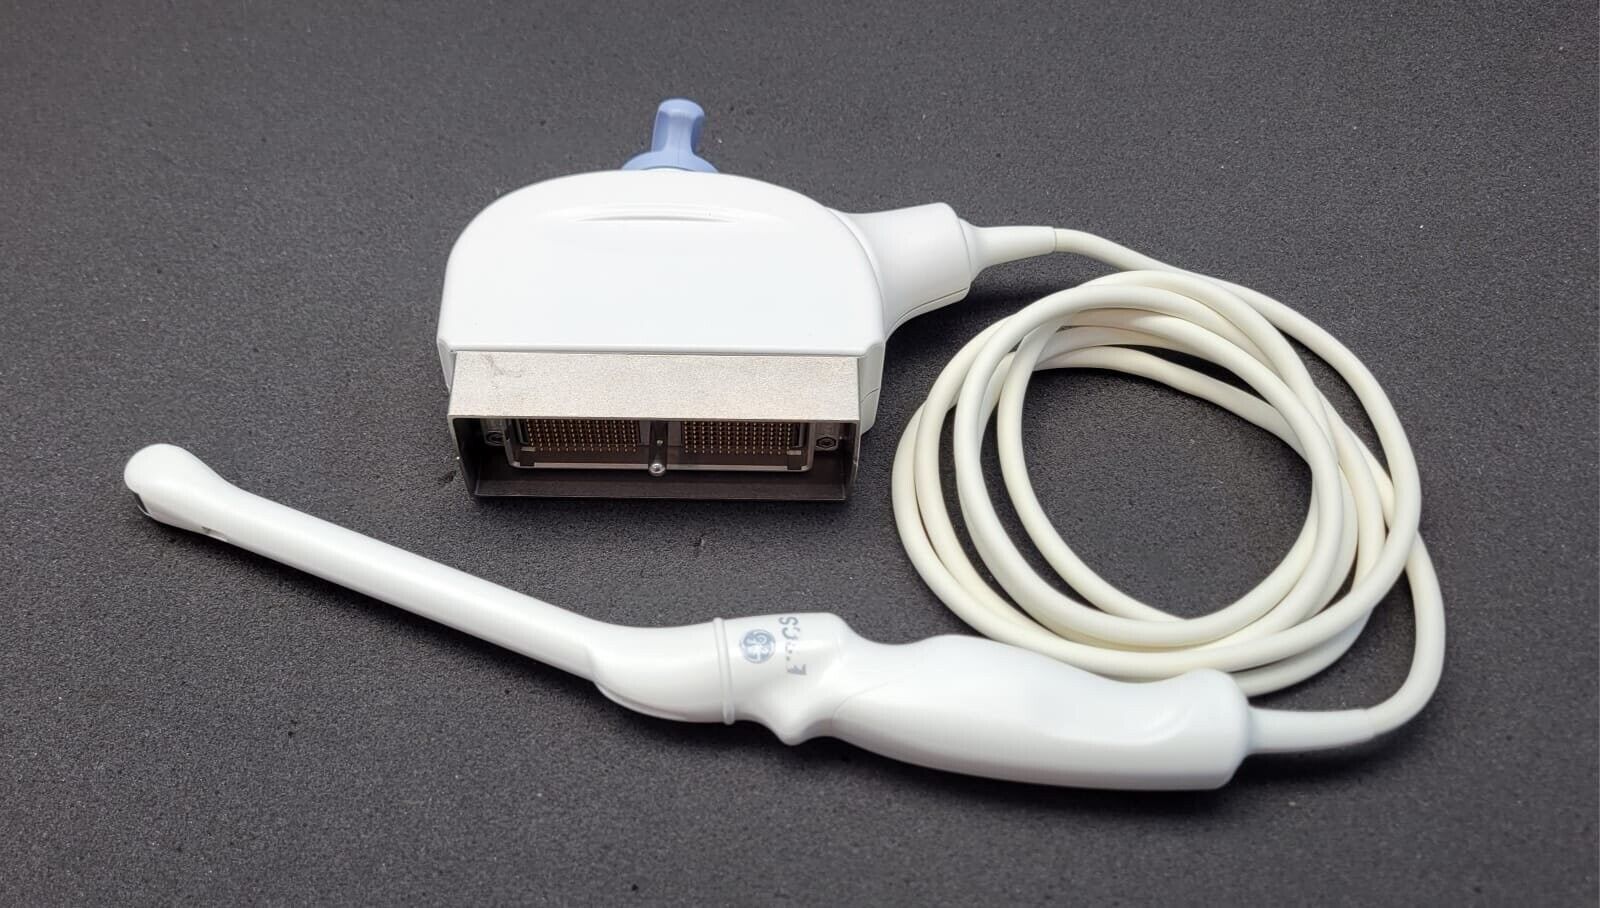 GE S4-10-D SECTOR ARRAY ULTRASOUND TRANSDUCER PROBE 5394804-2